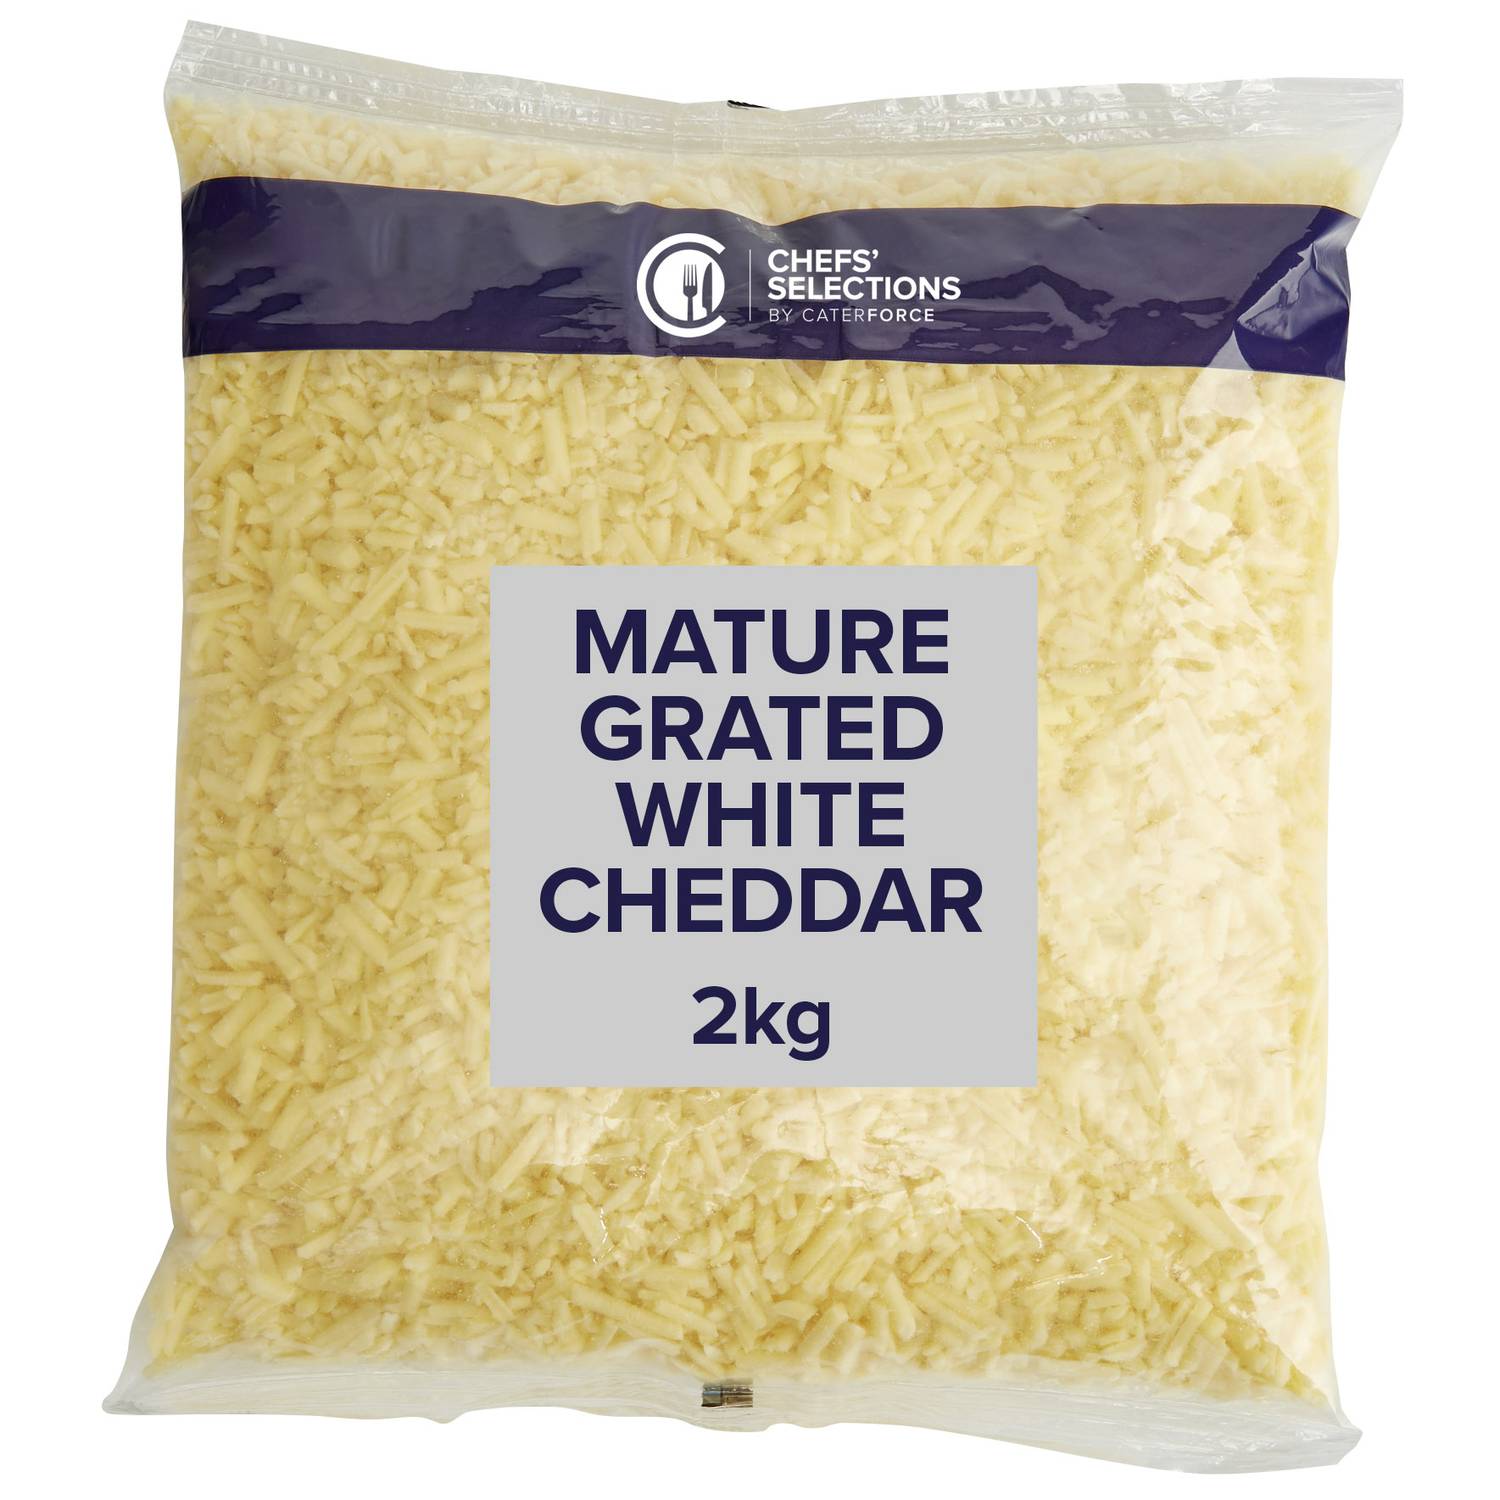 Chefs’ Selections Grated White Mature Cheddar (6 x 2kg)